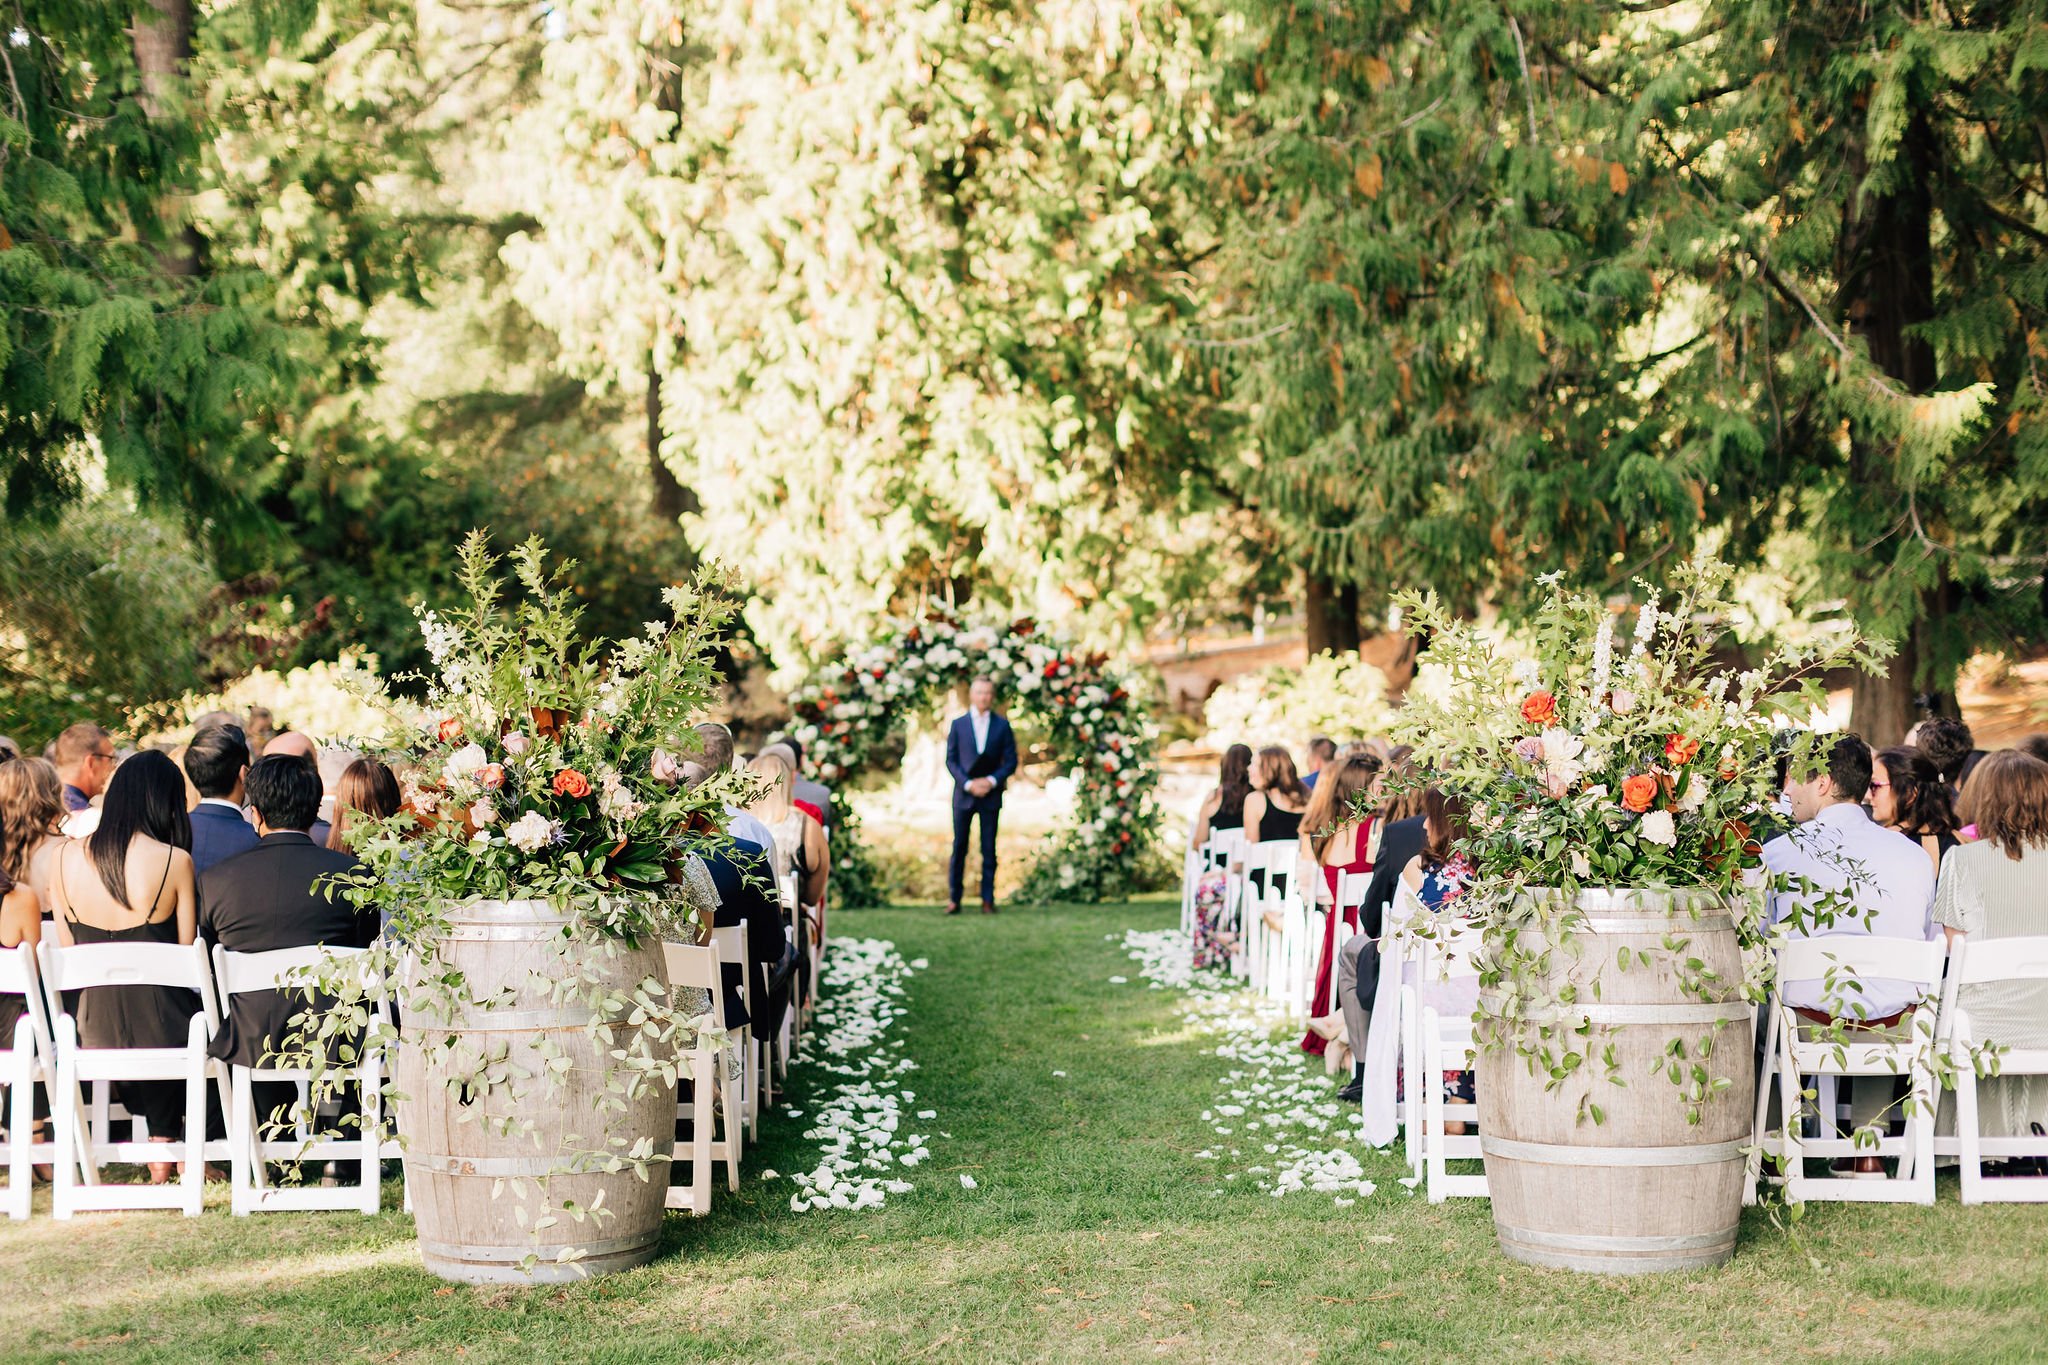 Woodinville-winery-wedding-venues-Chateau-lill-wedding-ceremony-lawn-photos-pacific-engagements-wedding-planning-and-design